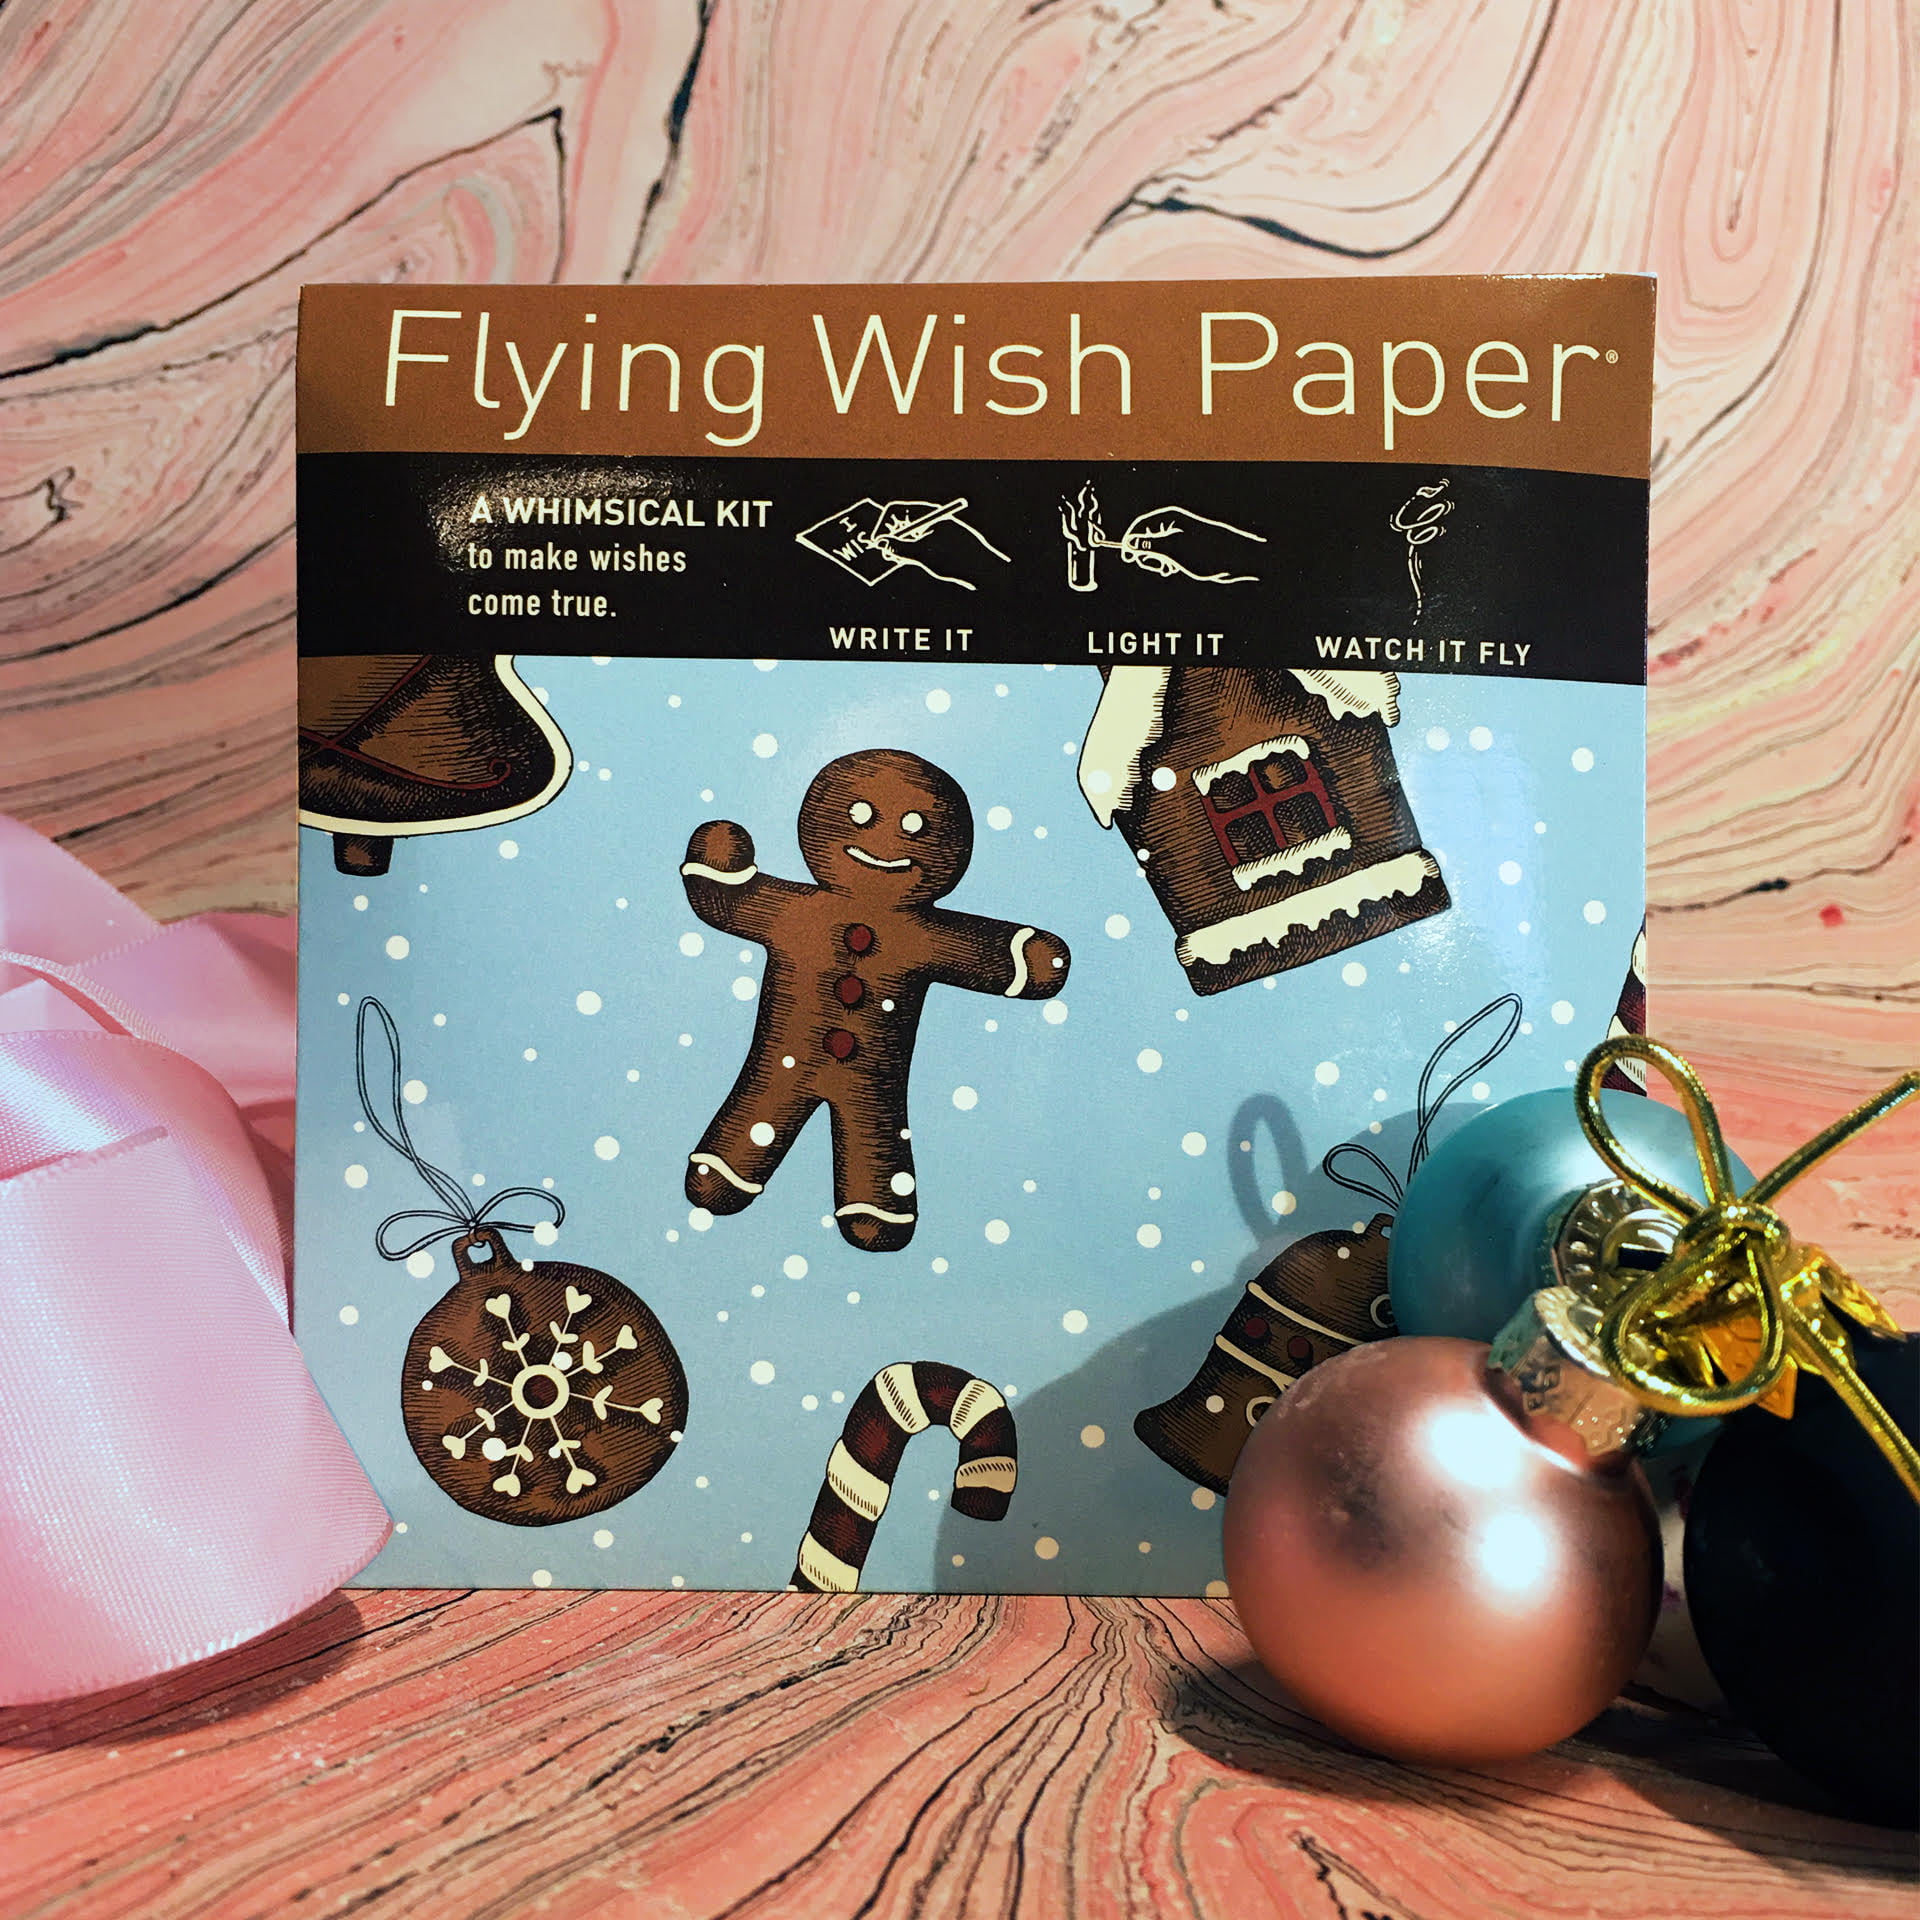 I Love Books - Flying Wish Paper from Flying Wish Paper,a